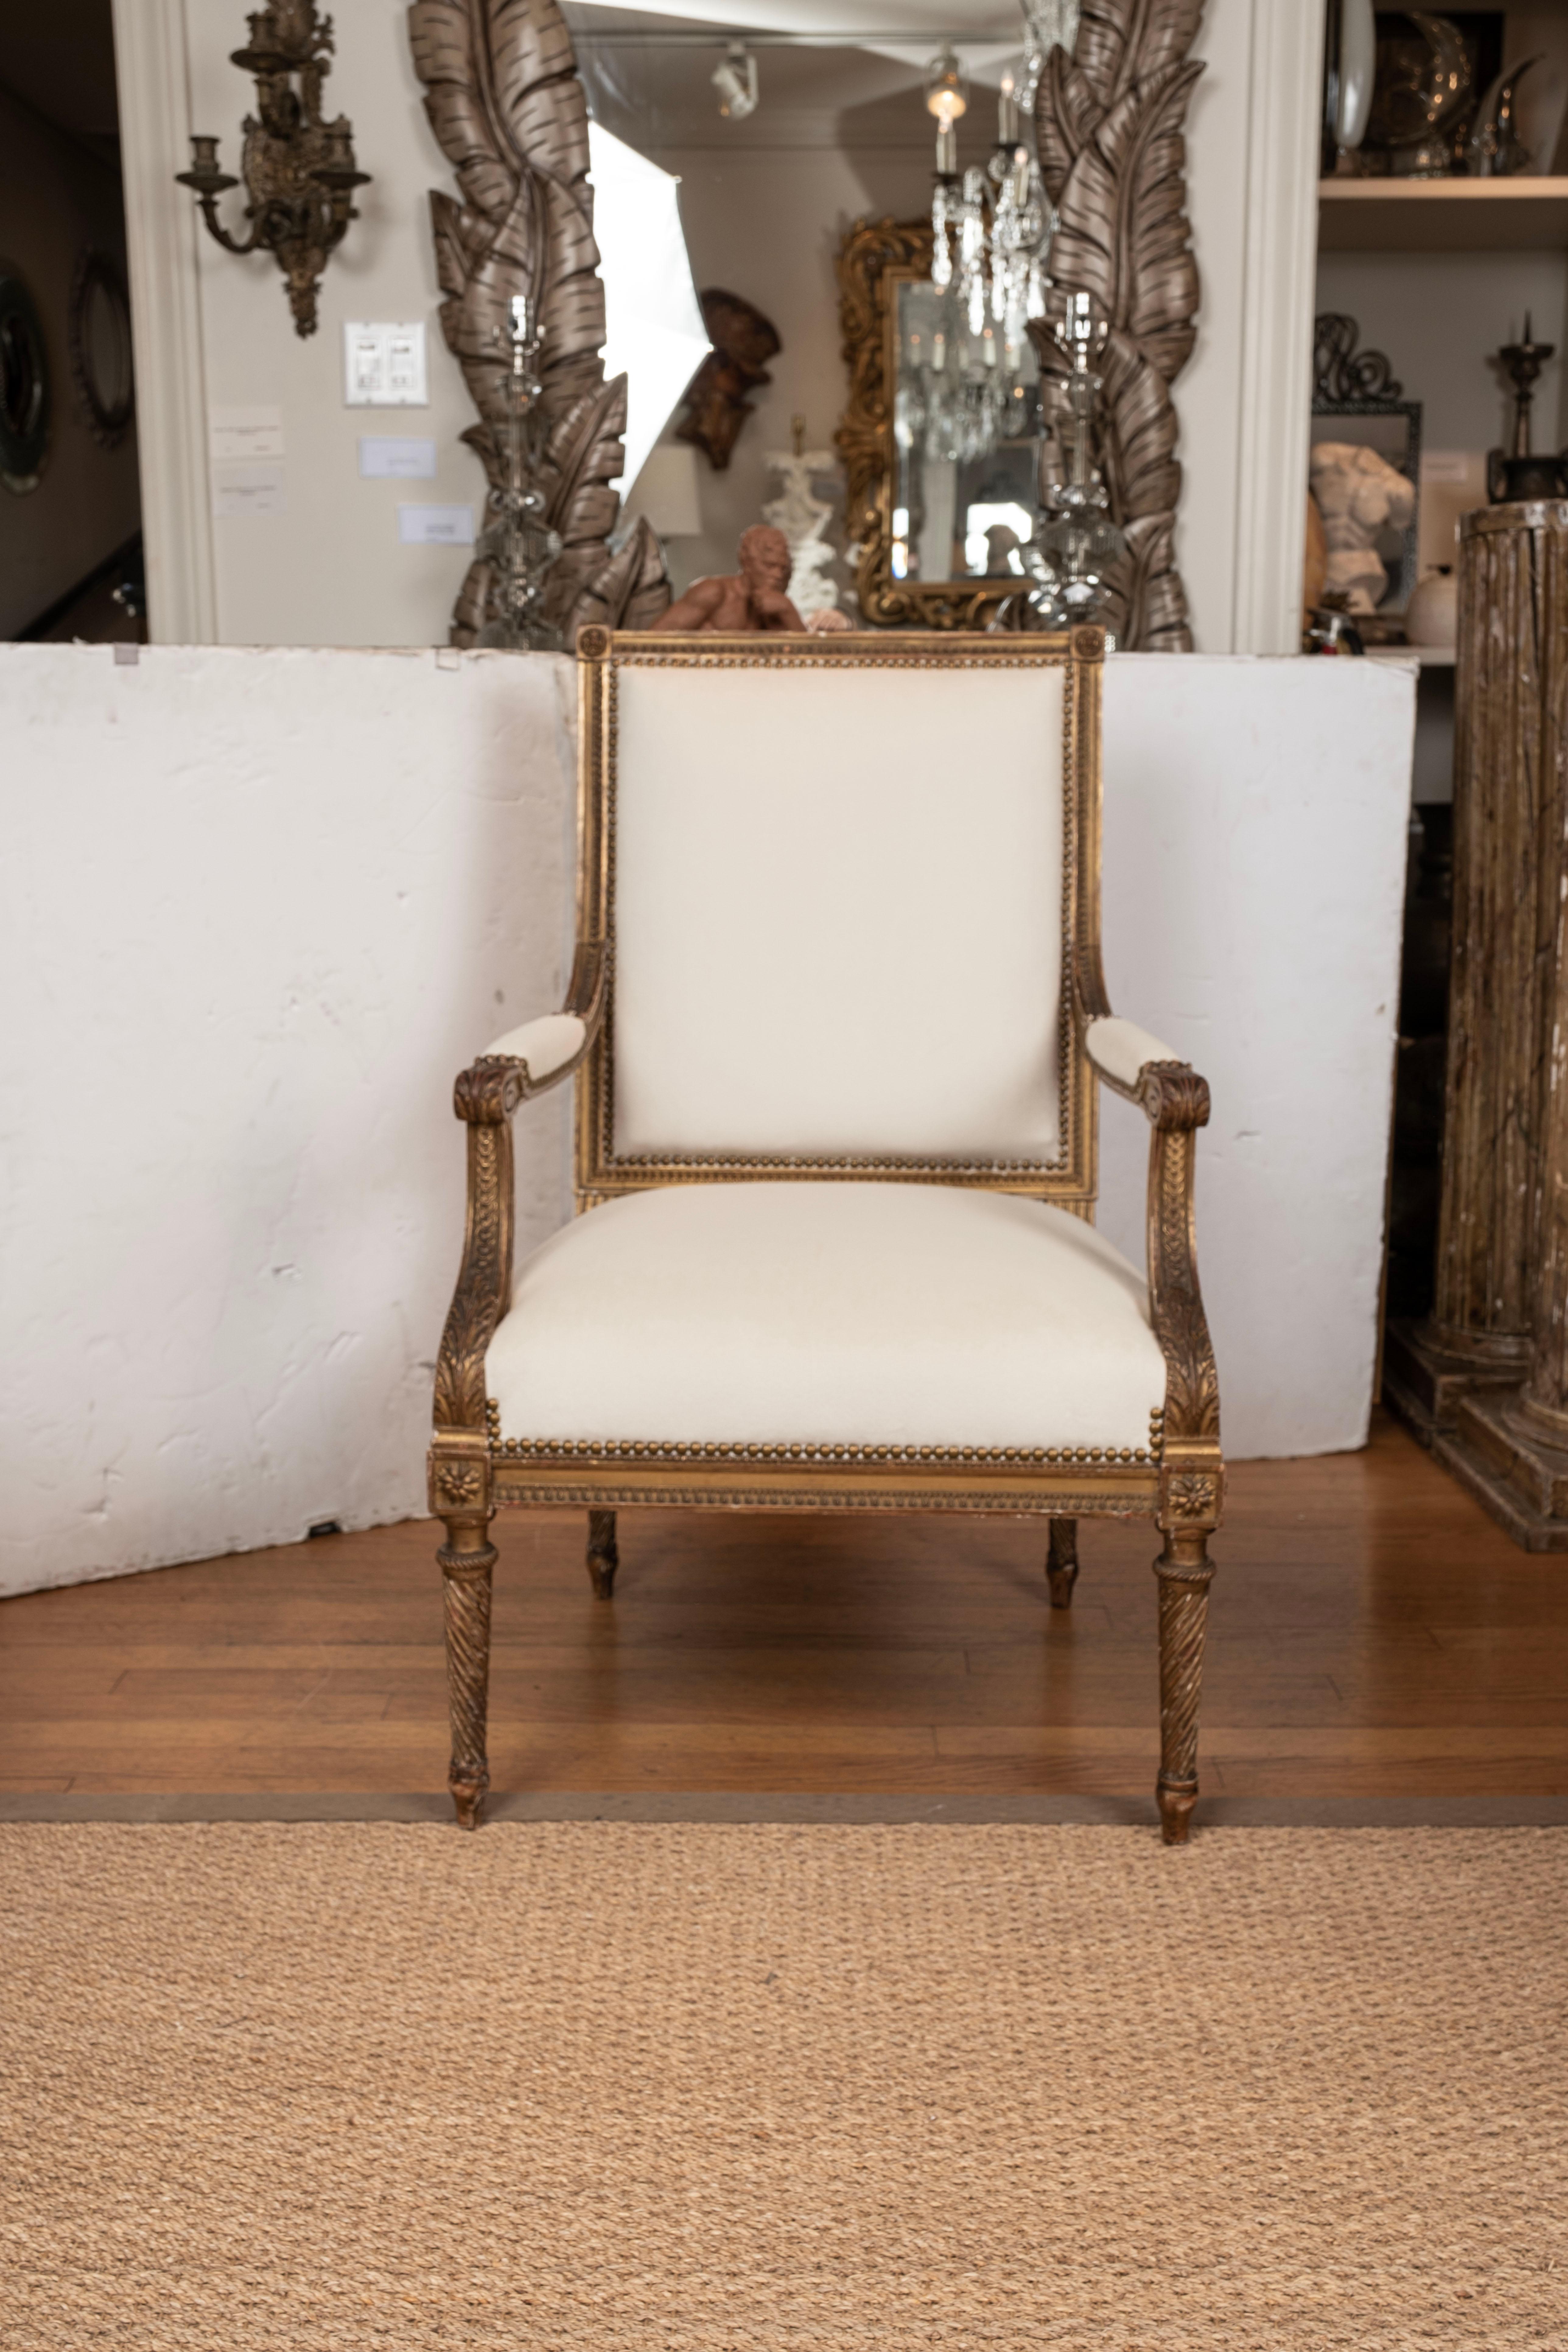 Pair of French Louis XVI style giltwood fauteuils or armchairs.
This lovely pair of French Louis XVI style gilt wood fauteuils, armchairs or side chairs are generous in size and are newly upholstered in cream low pile mohair like fabric.
Excellent